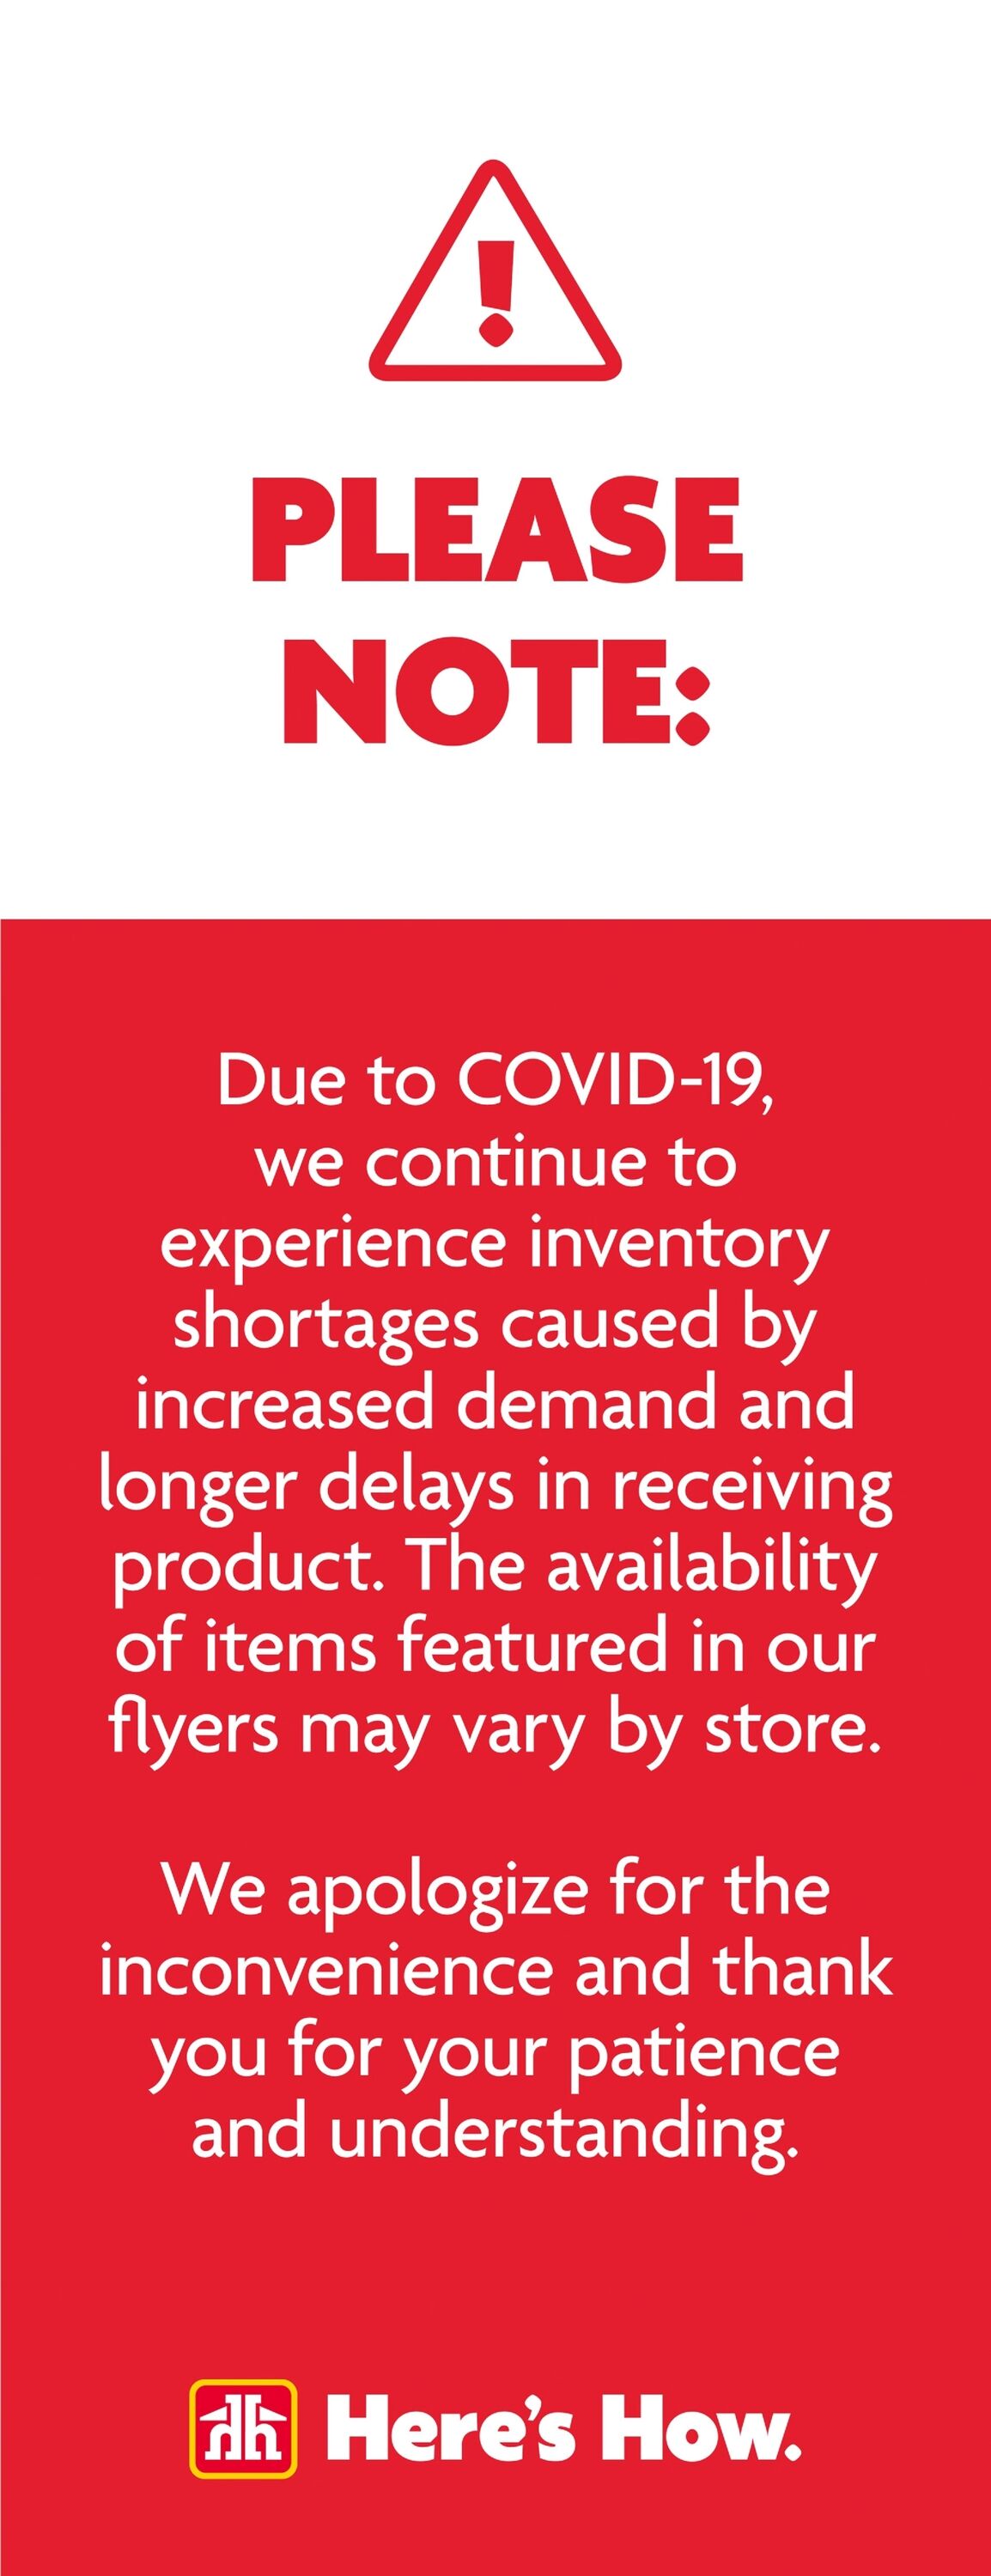 Home Hardware Flyer from 11/10/2022